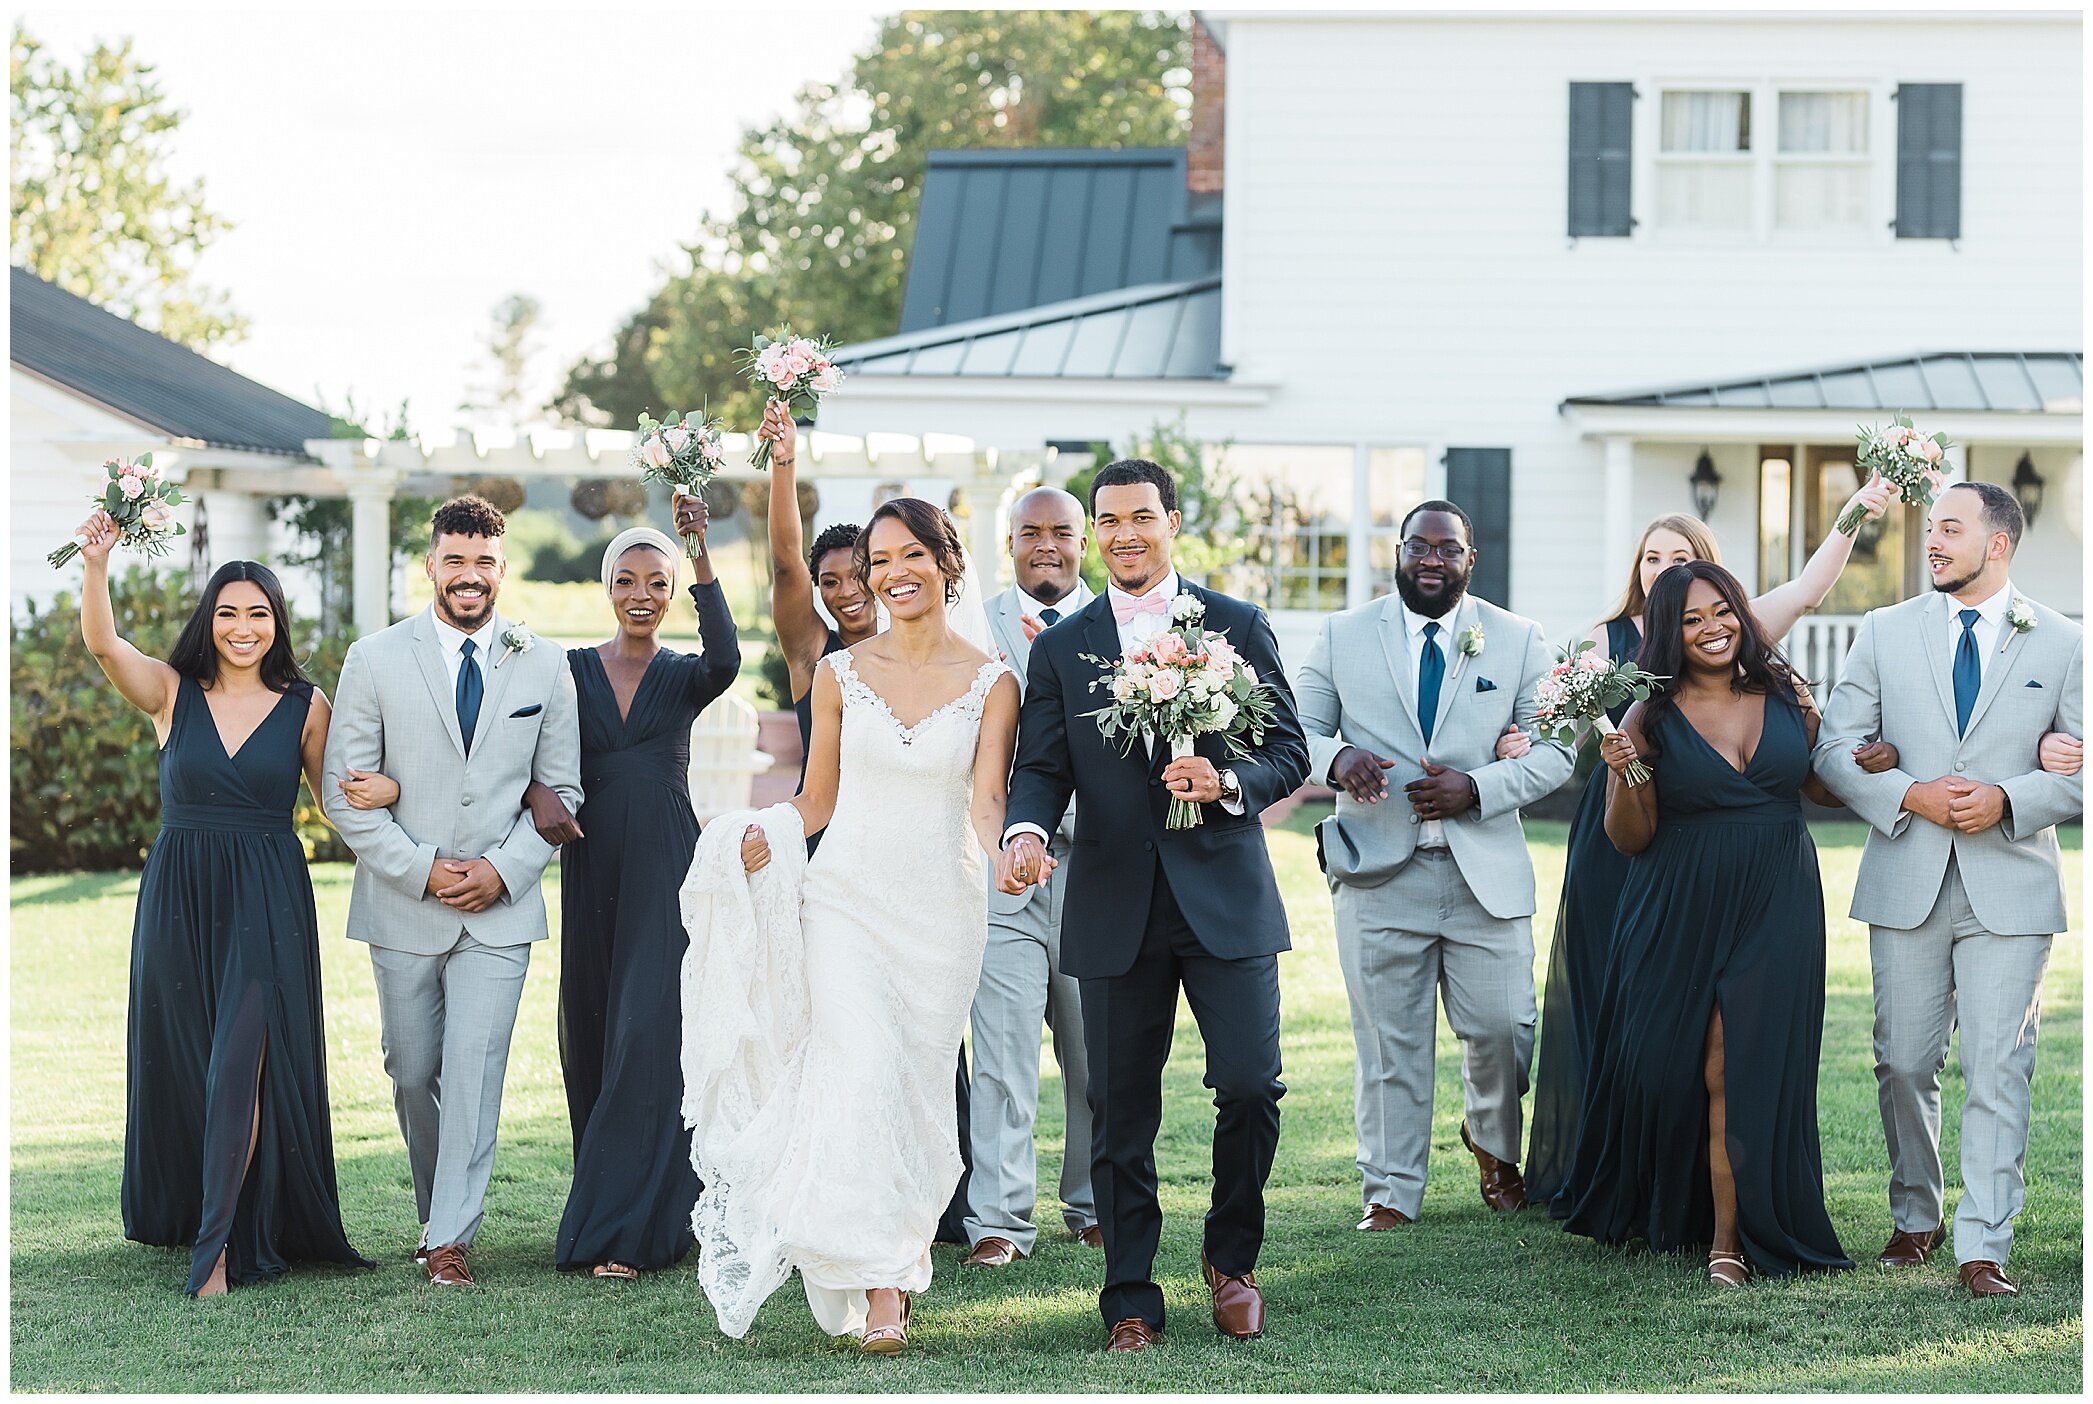 bride and groom walk with bridesmaids in teal gowns and groomsmen in grey suits at The Barns at Timberneck